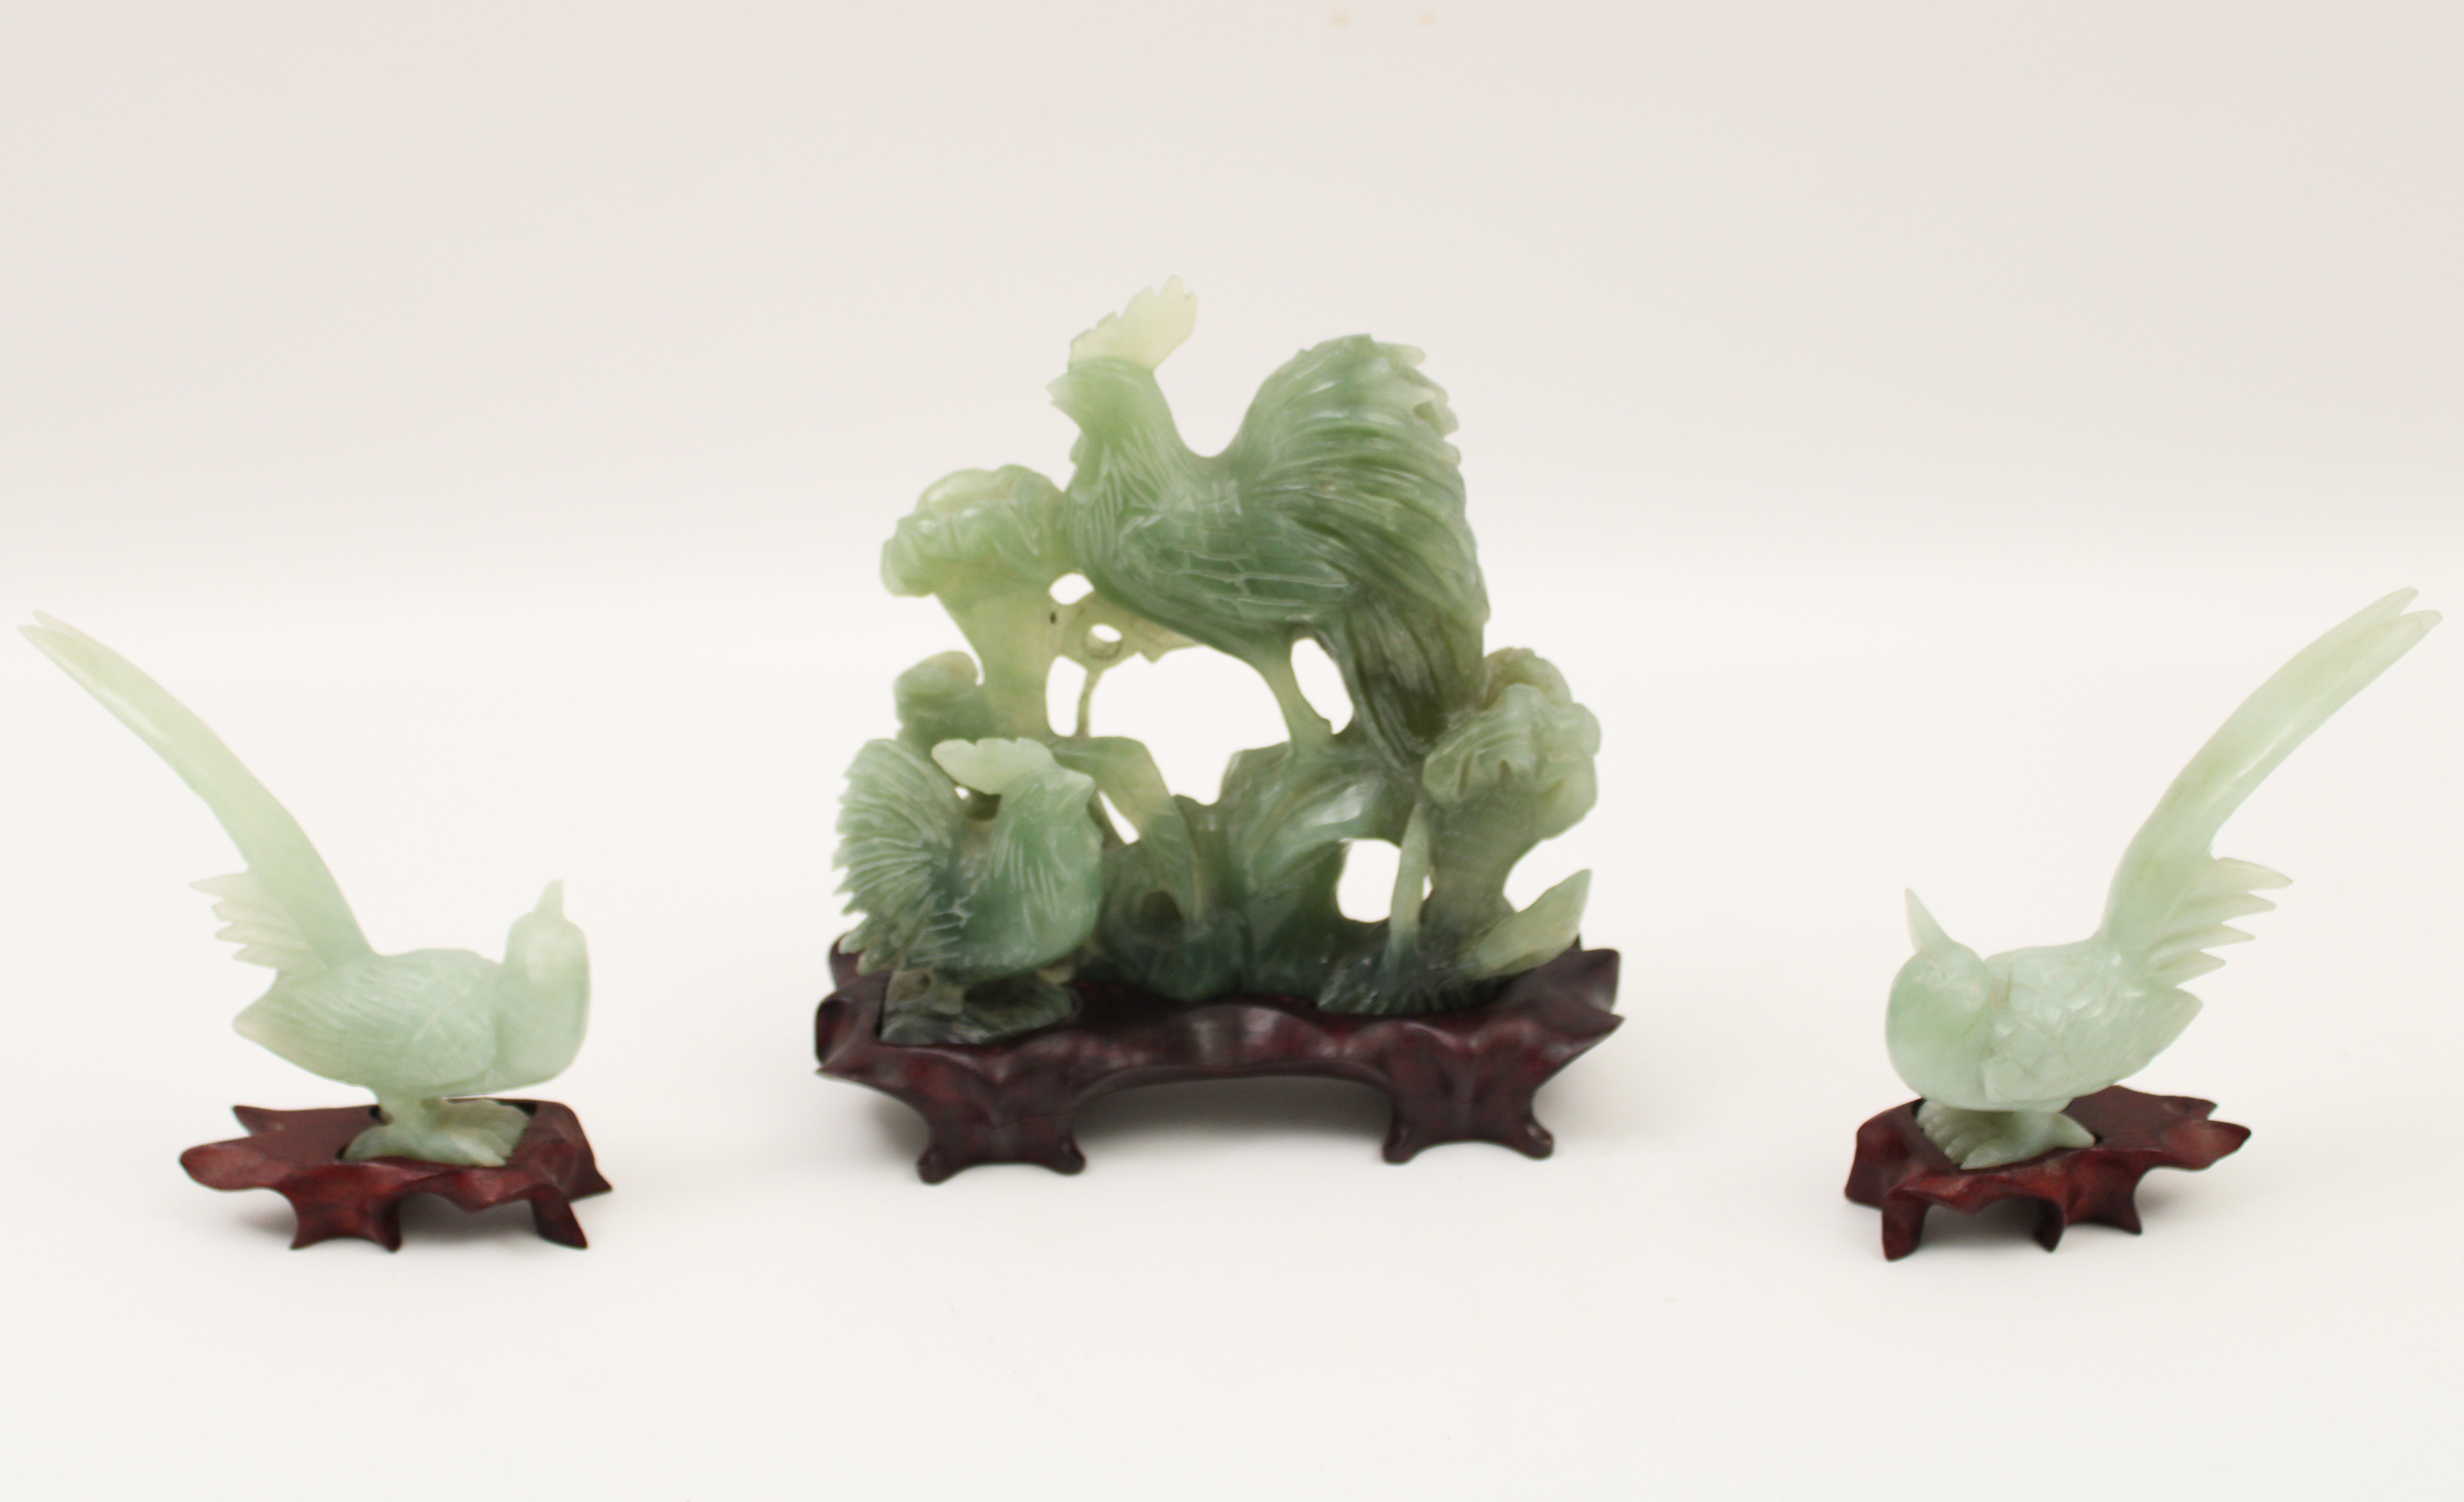 GROUP OF 3 CHINESE JADE FIGURES